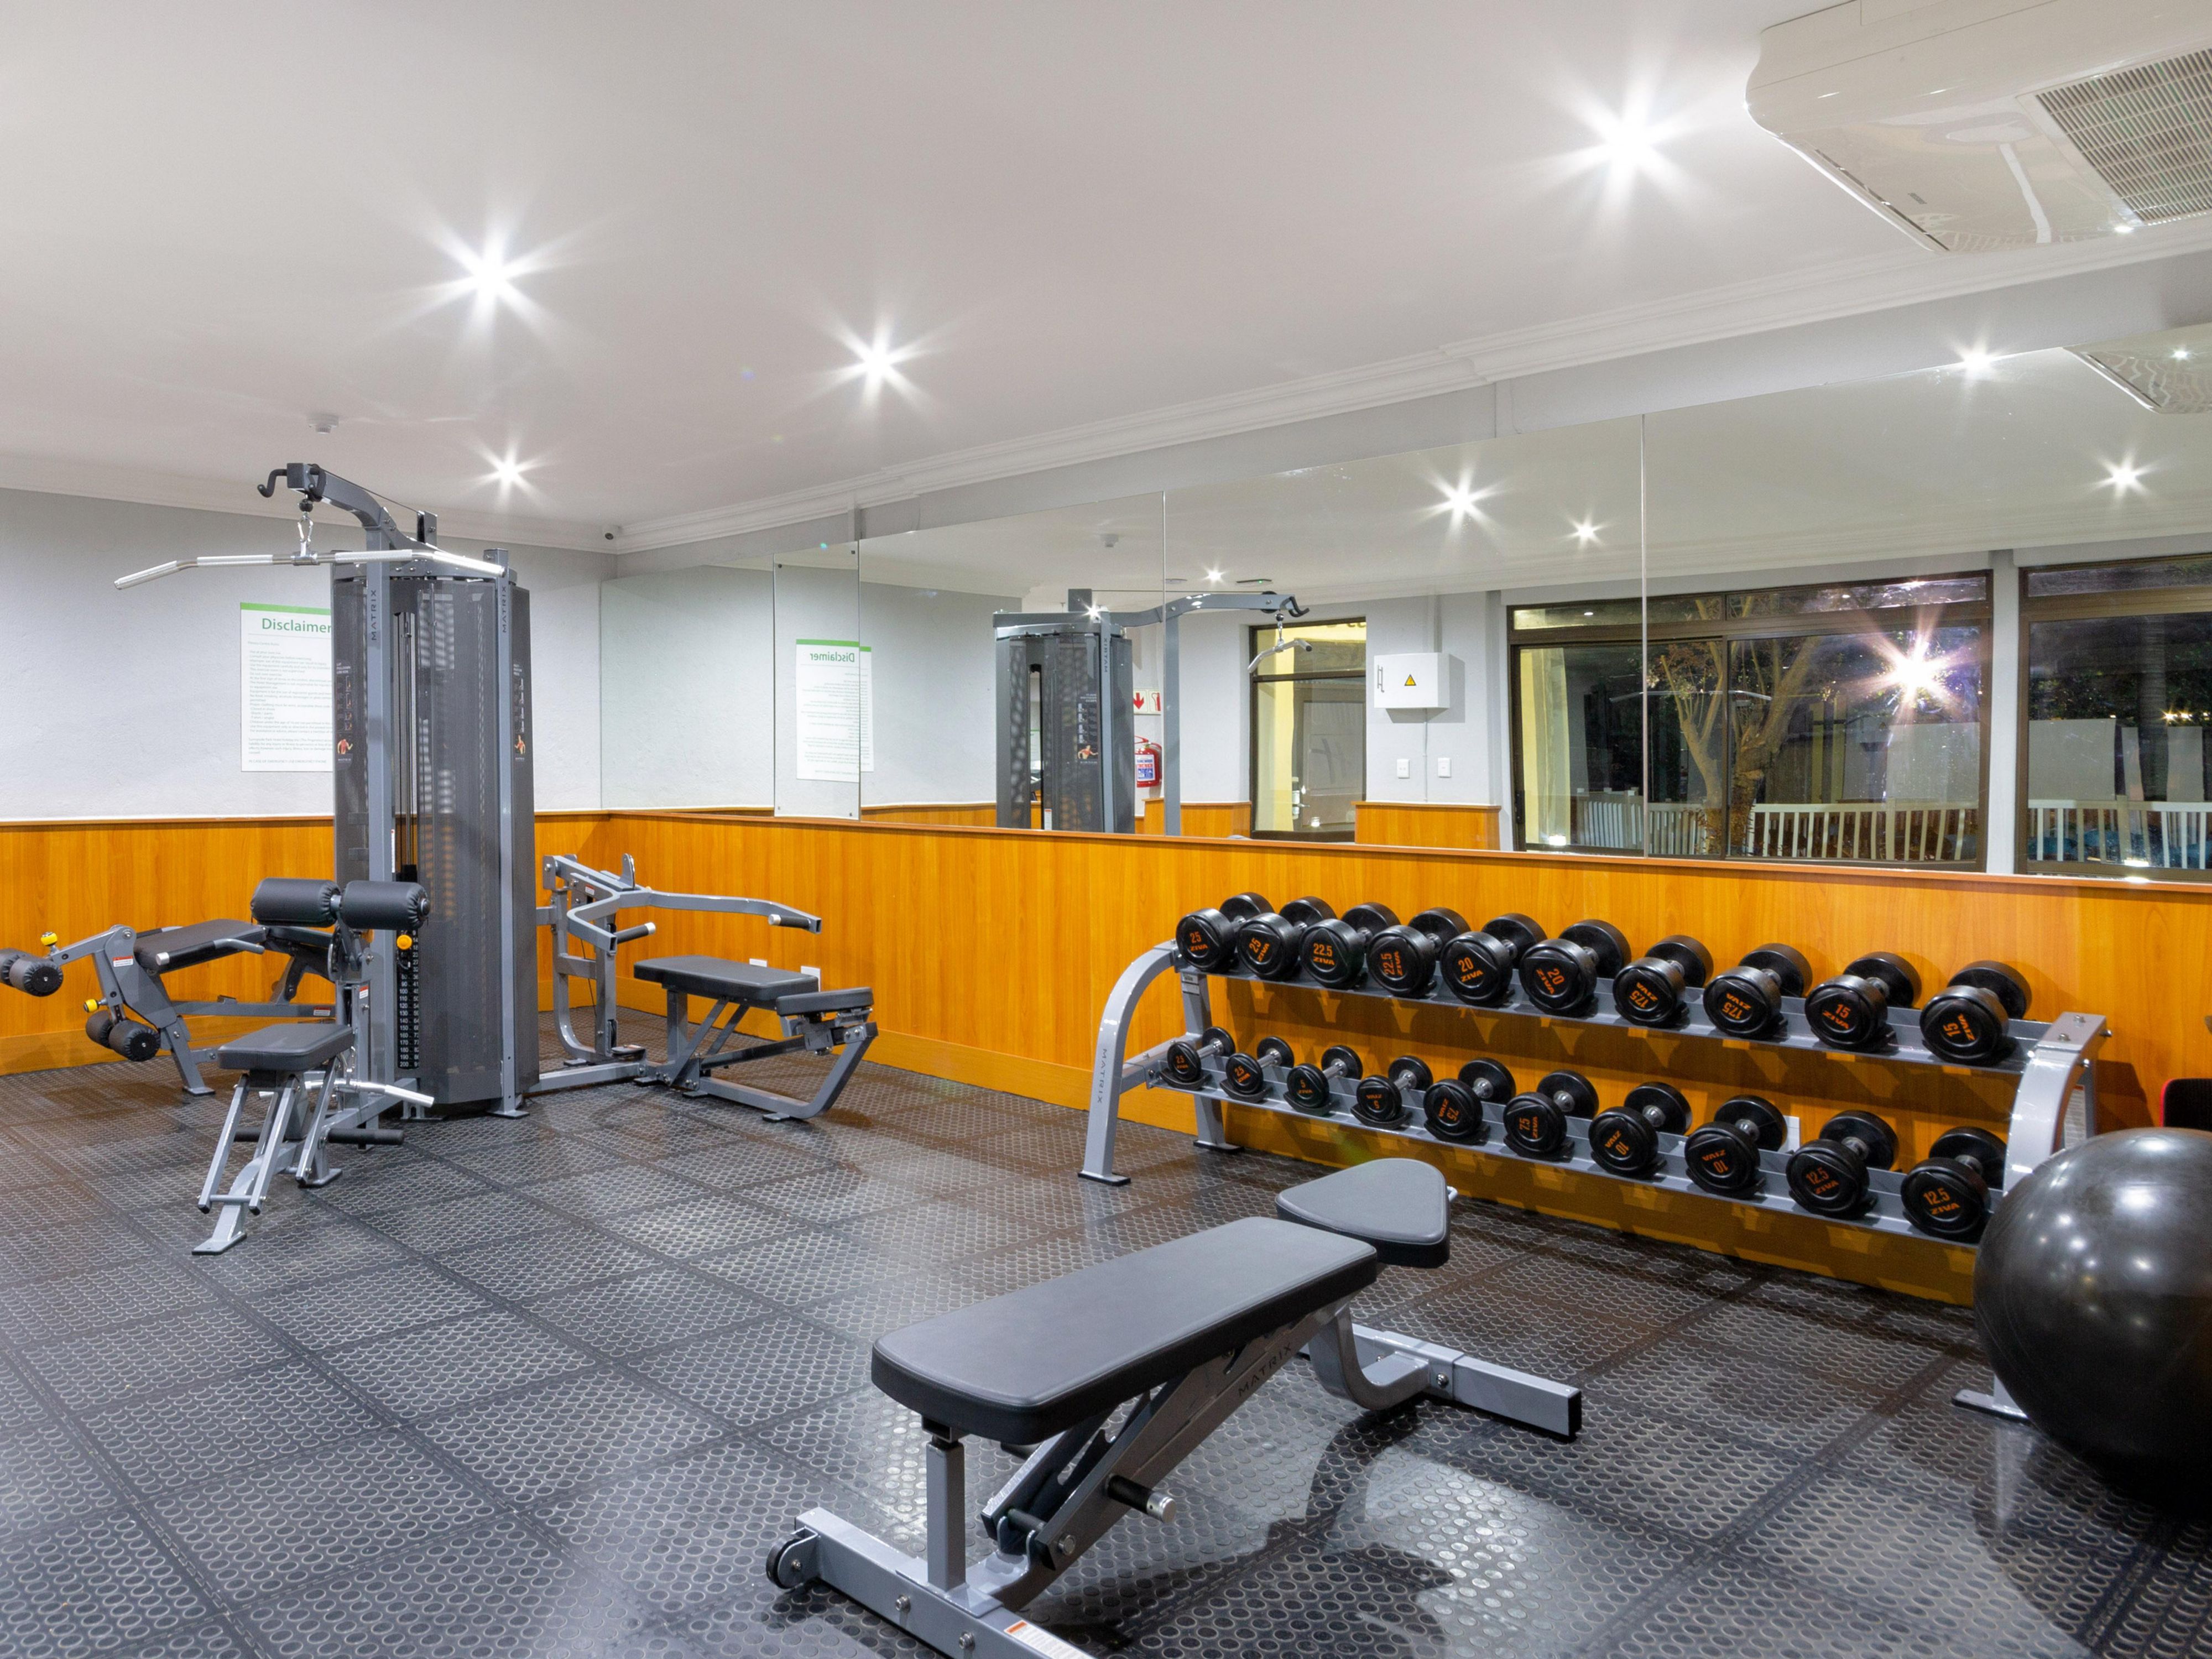 It's never been easier to stay active. 
Healthy is the new happy, and you can achieve just that at our onsite Fitness Centre. Enjoy the view of our beautiful gardens while burning some calories in our well-equipped gym.
